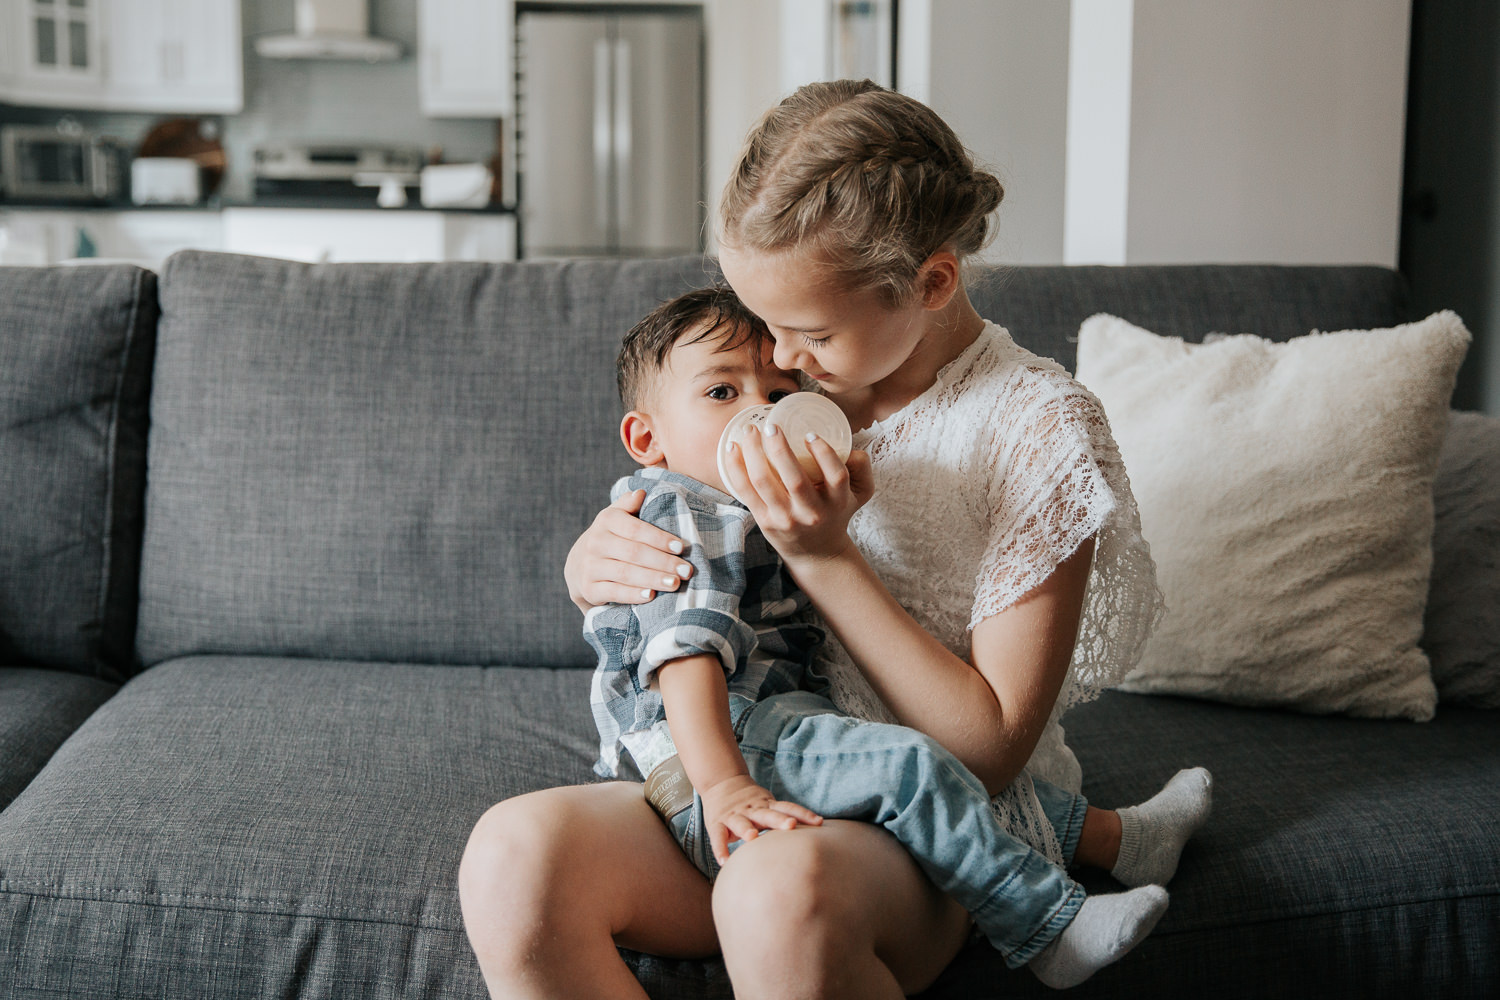 11 year old girl with blonde hair sitting on couch feeding 1 year old dark haired boy in shirt and jeans a bottle - Newmarket Lifestyle Photography